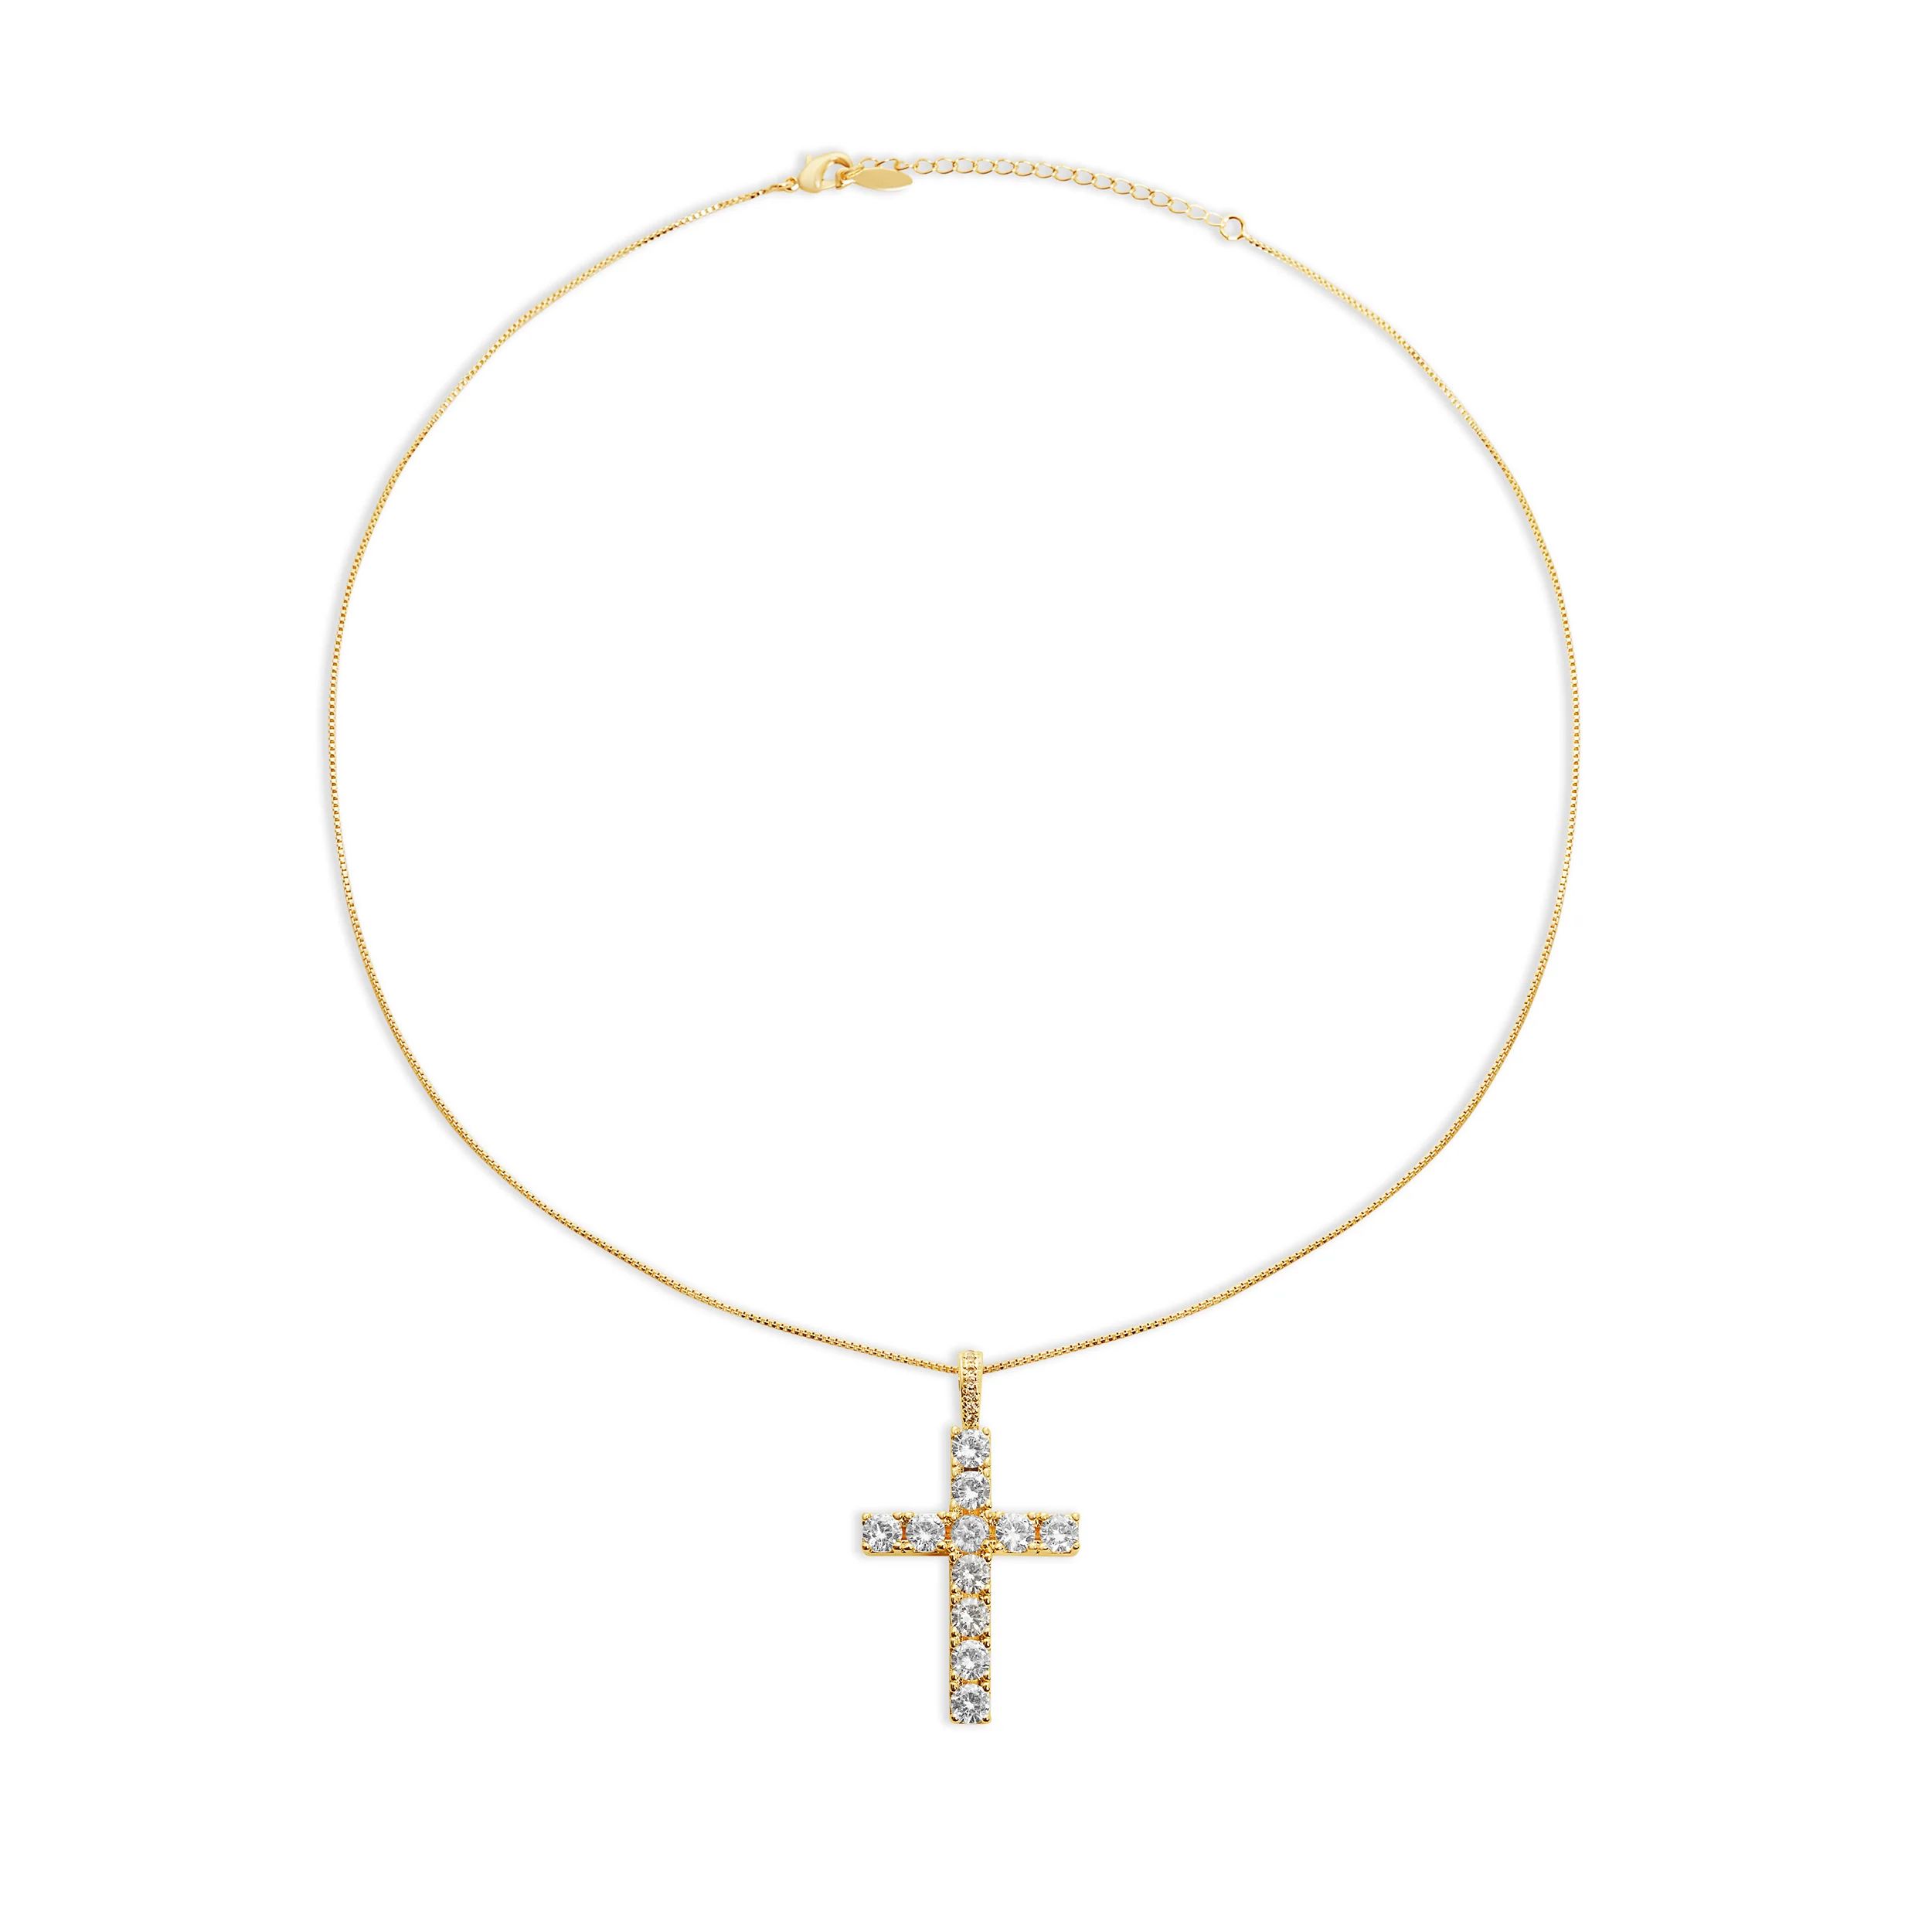 THE LARGE PAVE' CROSS NECKLACE | The M Jewelers